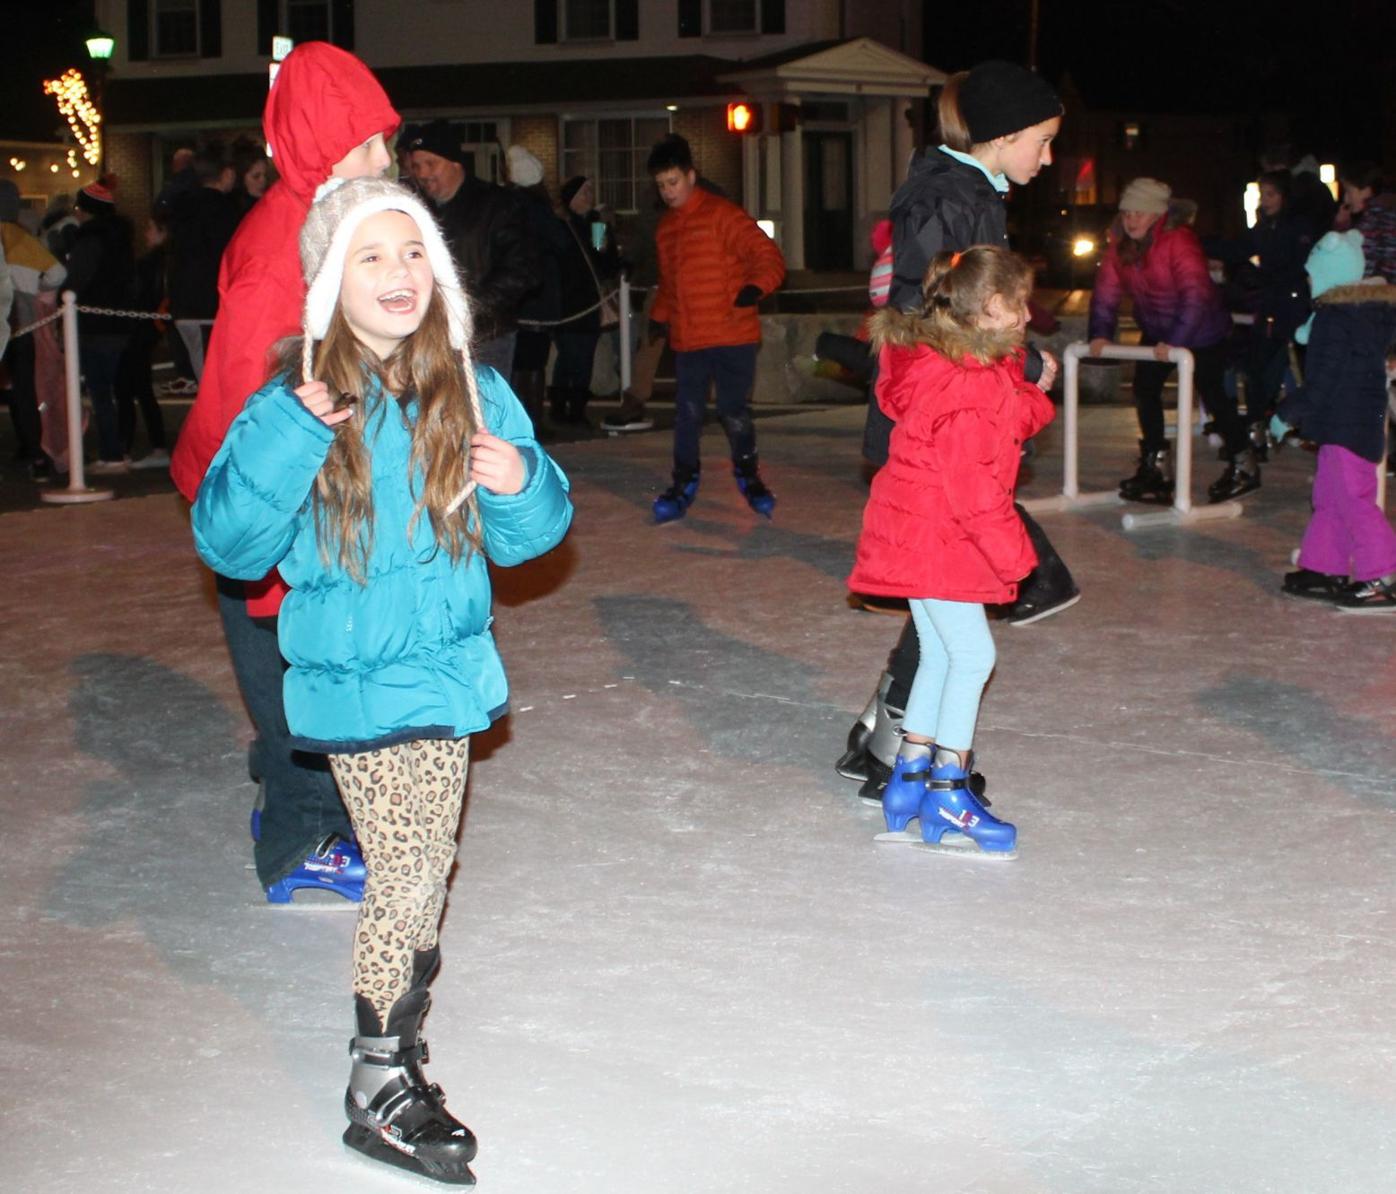 Rising Sun's Winter Extravaganza promises frosty holiday fun